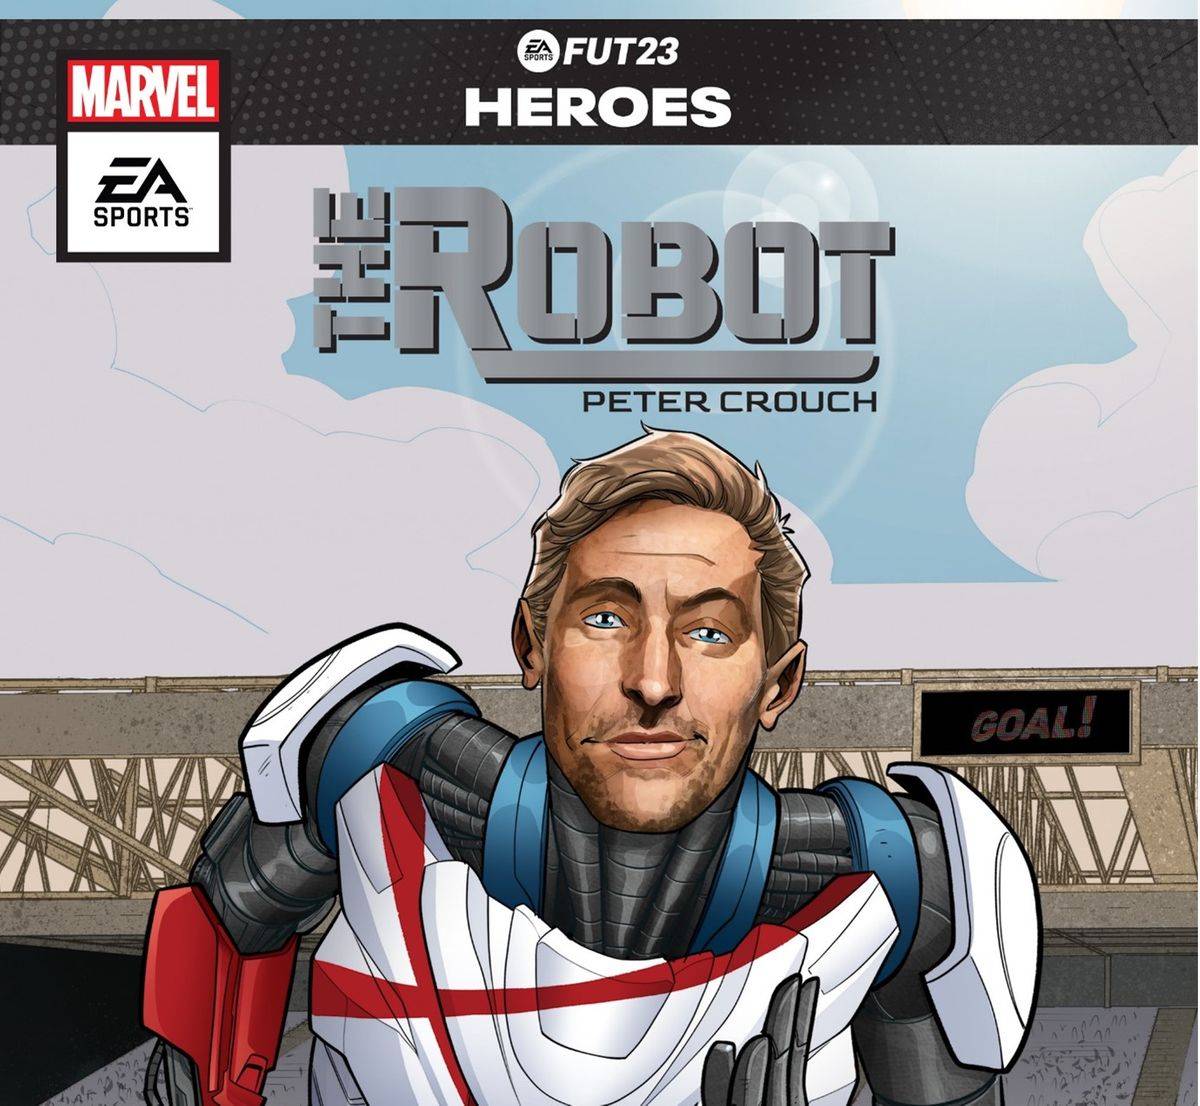 Peter Crouch as "The Robot" in FIFA 23